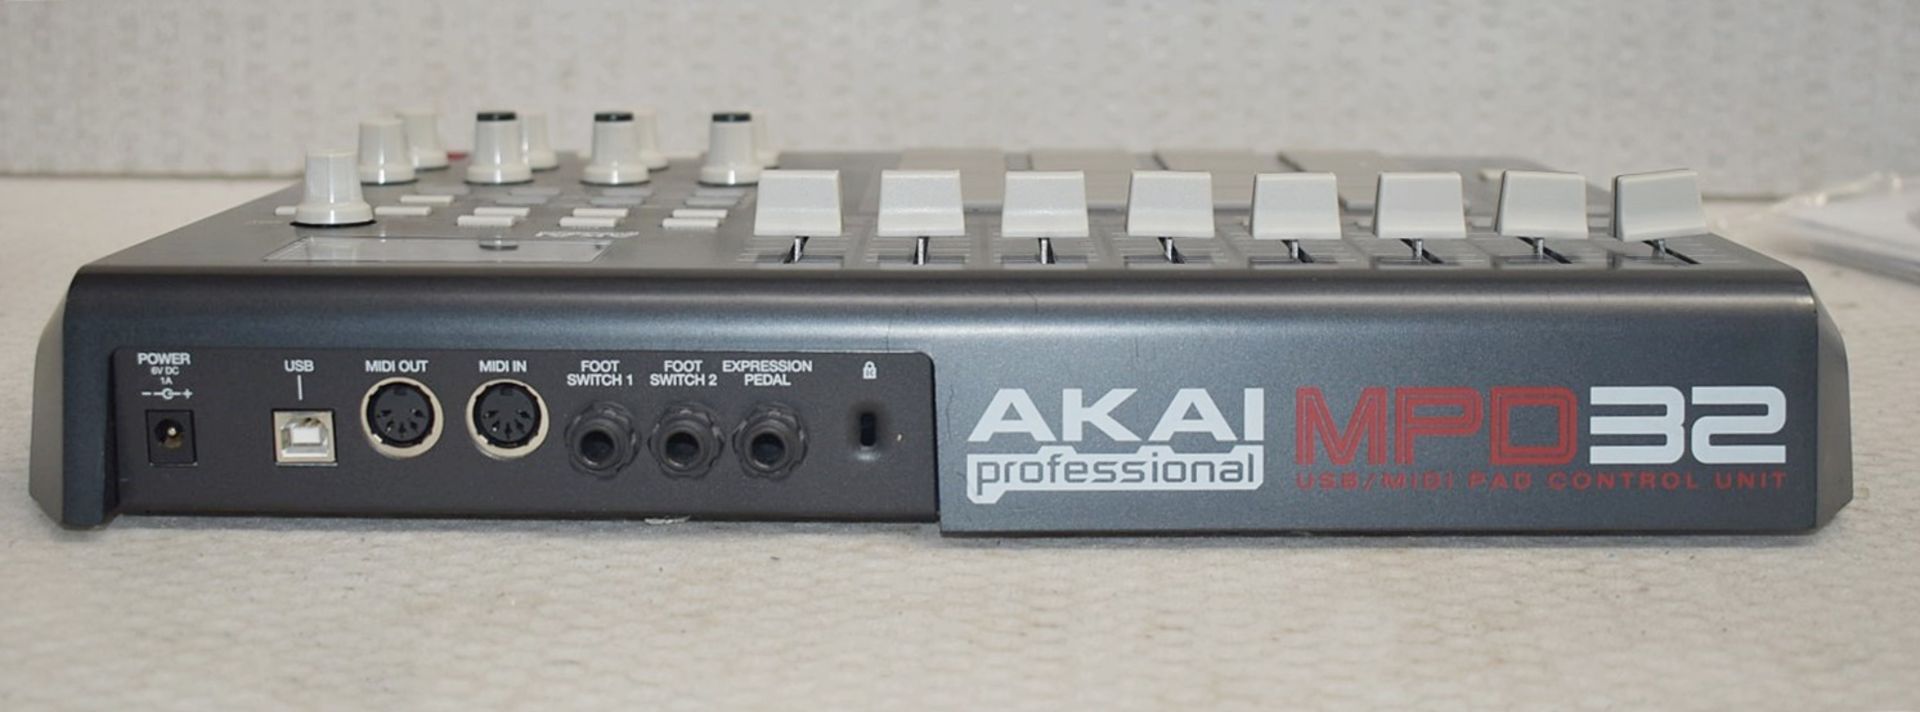 1 x AKAI Professional MPD32 USB/Midi MPC Pad Controller, Musicians and DJs - Ref: DS7606 ALT WH2 - - Image 4 of 10